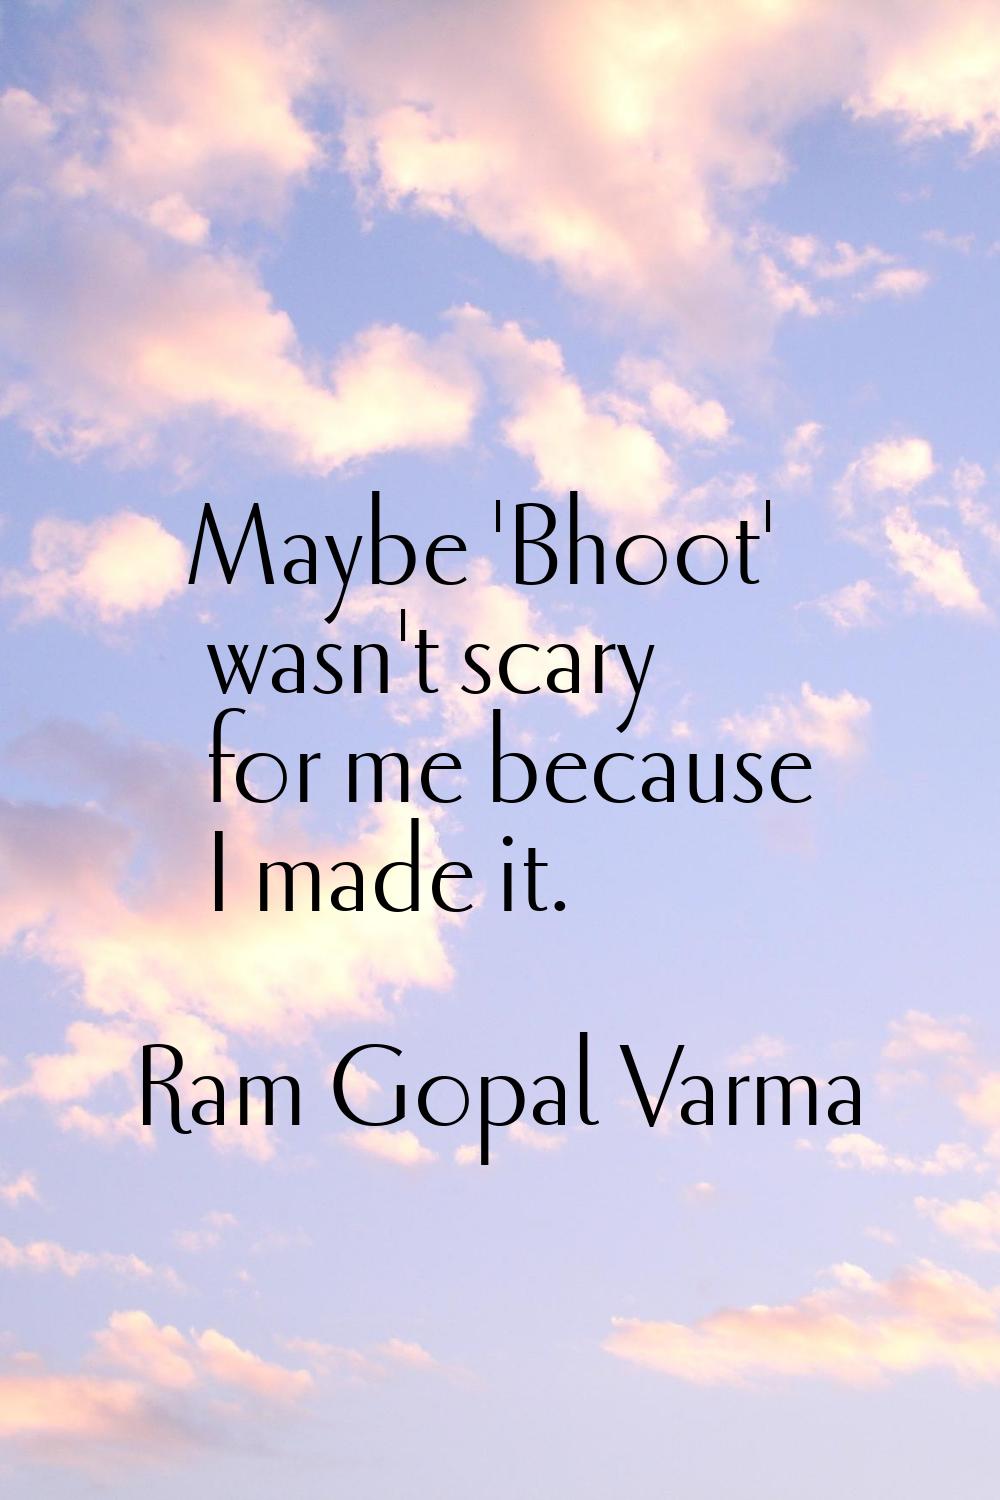 Maybe 'Bhoot' wasn't scary for me because I made it.